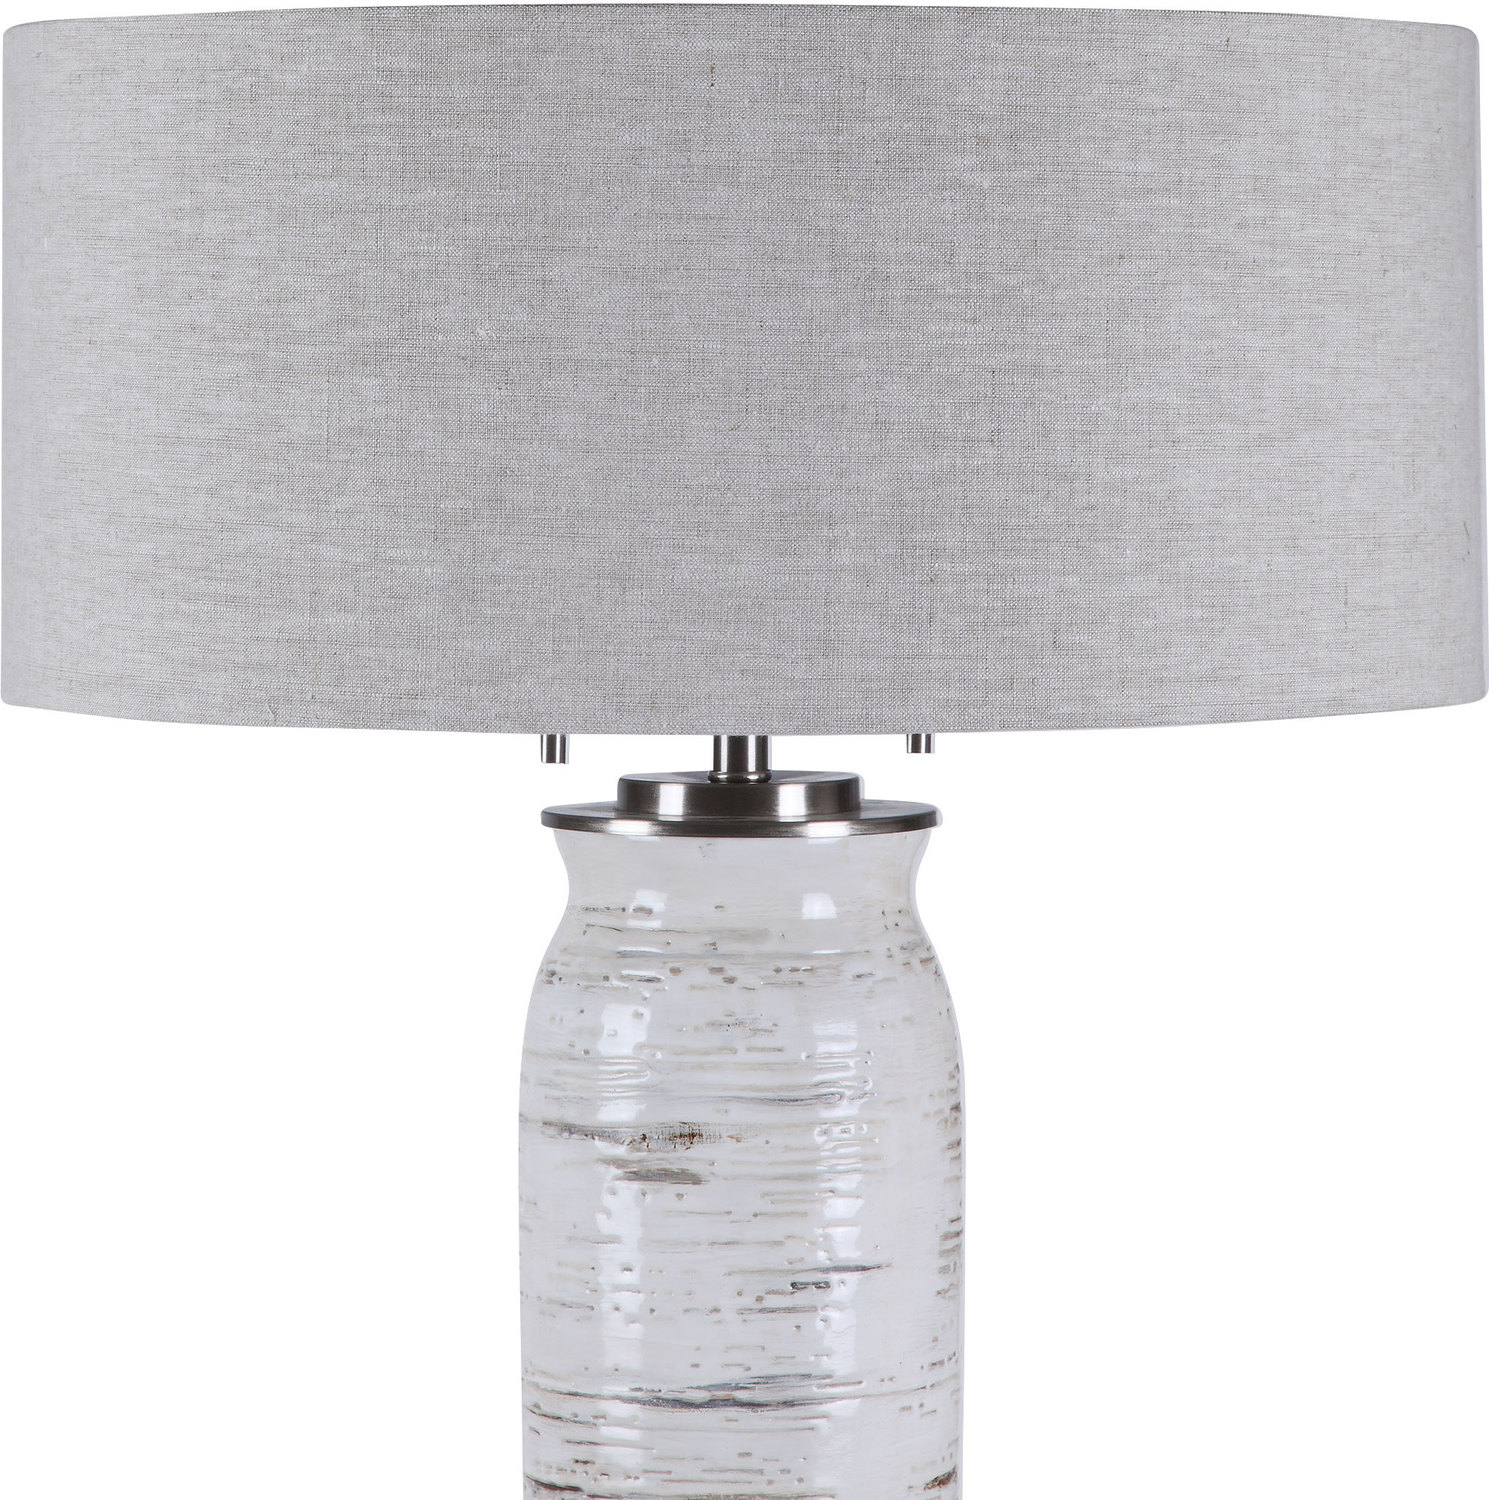 small glass light bulb covers Uttermost White Table Lamp Inspired By The Bark Of A Birch Tree, This Table Lamp Features A Ceramic Base Finished In Off-white With Rust-colored Accents And Noticeable Texture And Distressing. The Piece Also Has A Crystal Foot And Brushed Nickel Details.